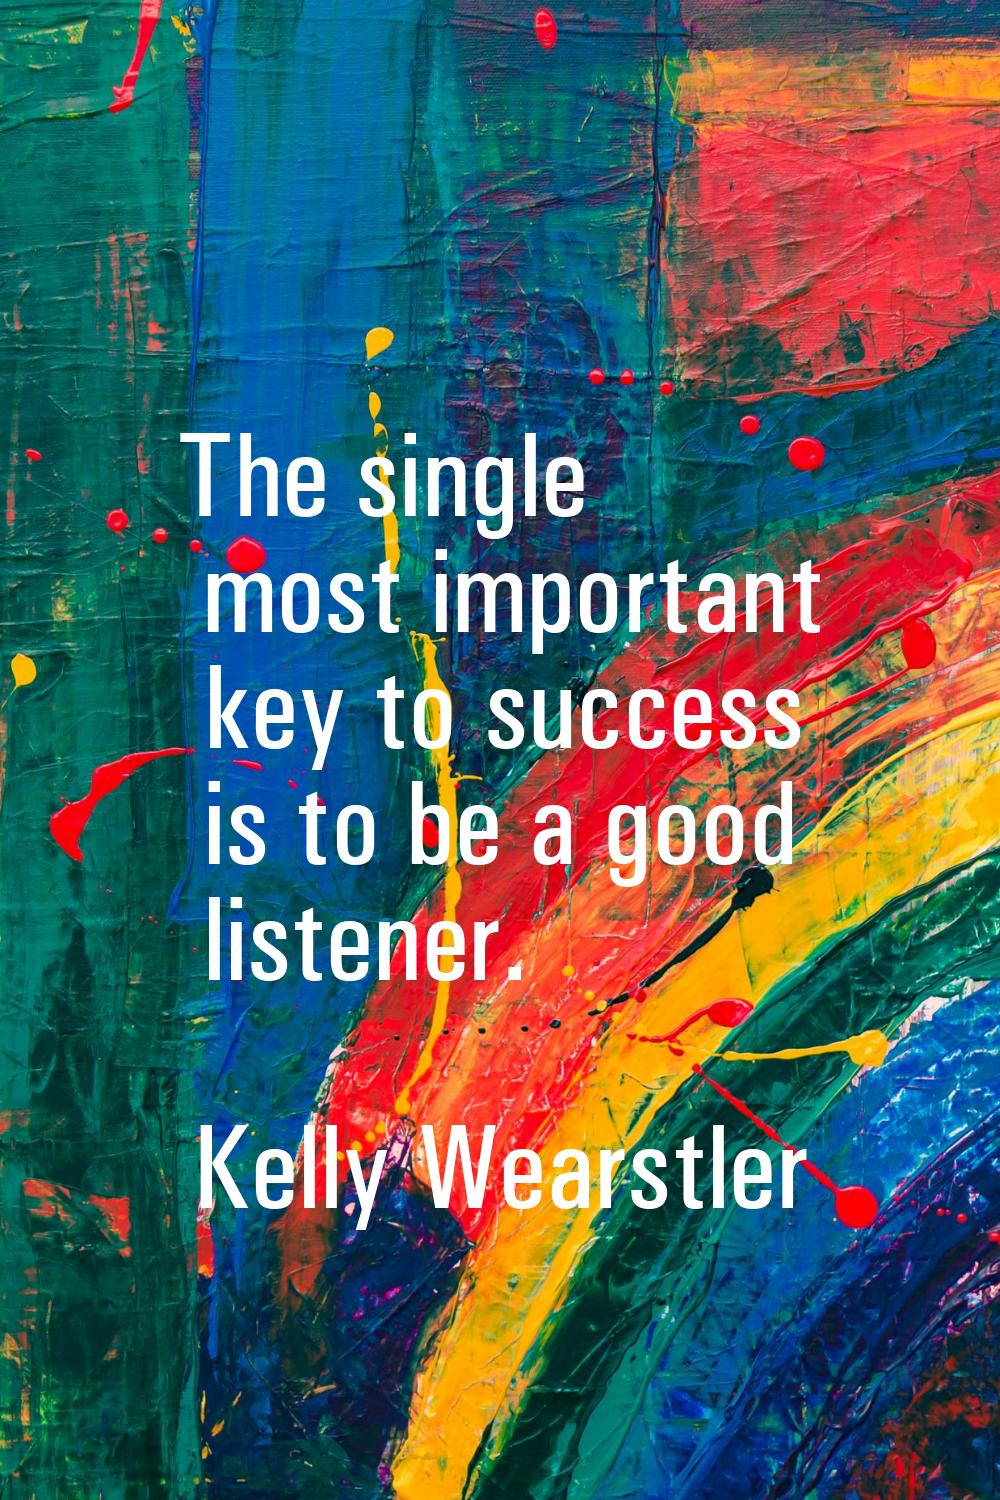 The single most important key to success is to be a good listener.